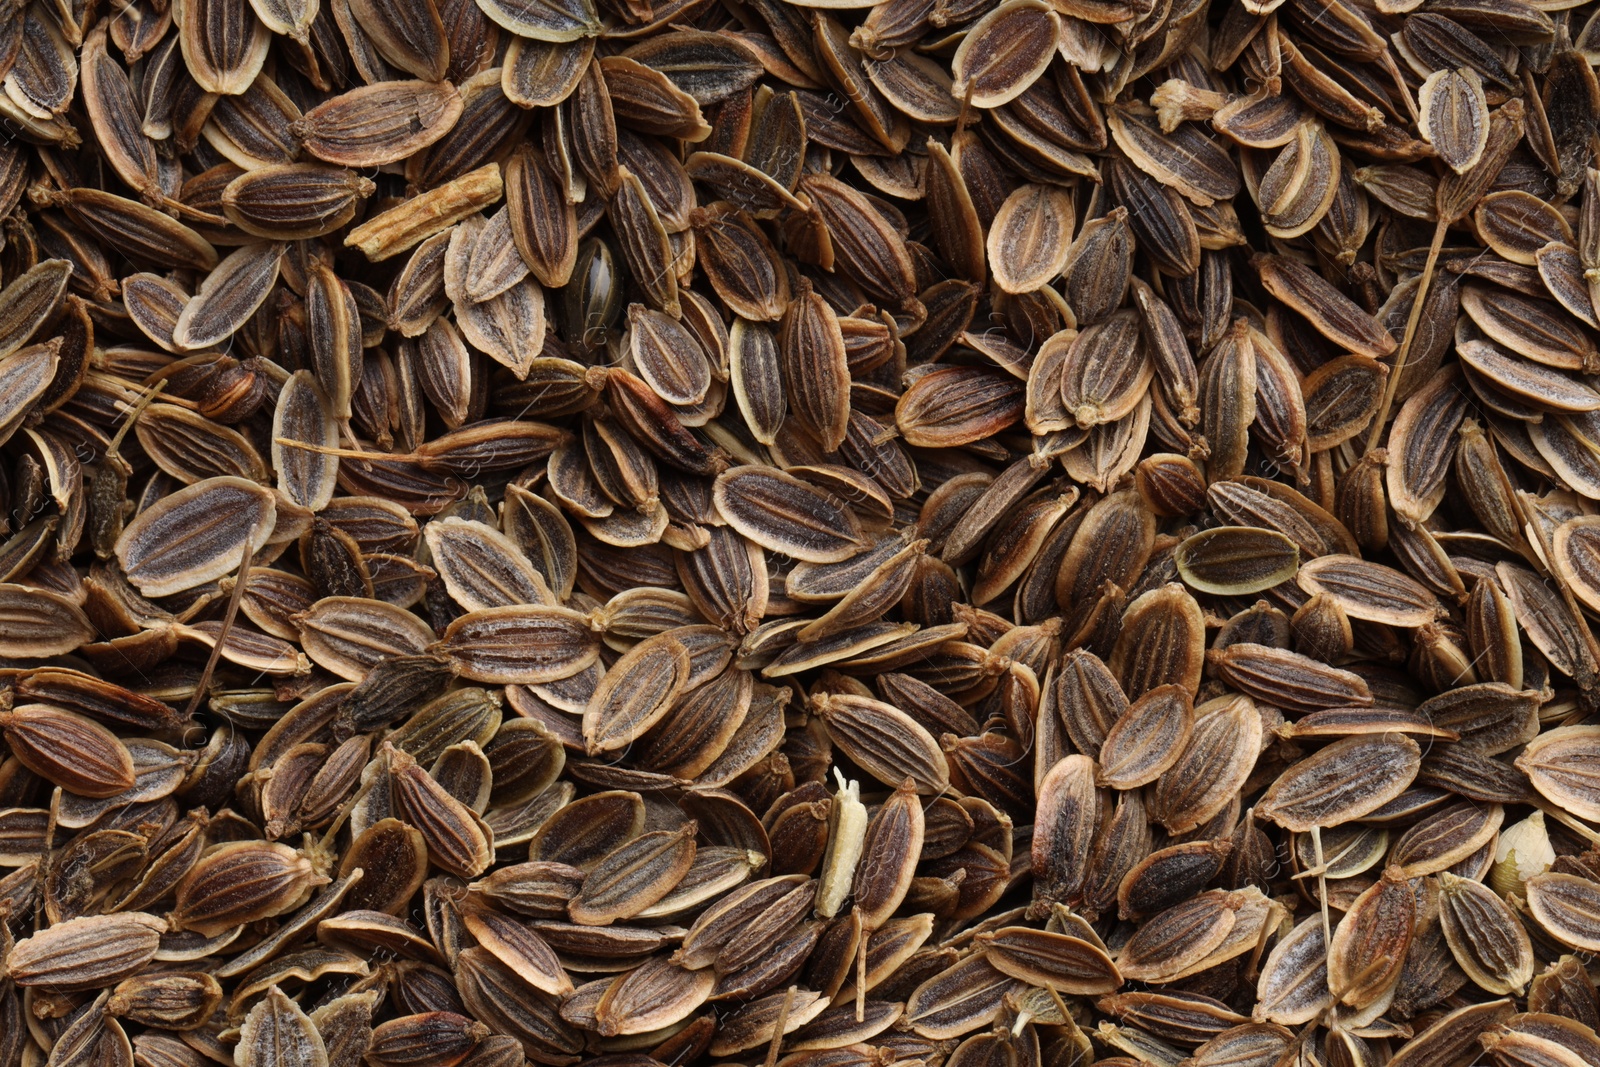 Photo of Many dry dill seeds as background, top view